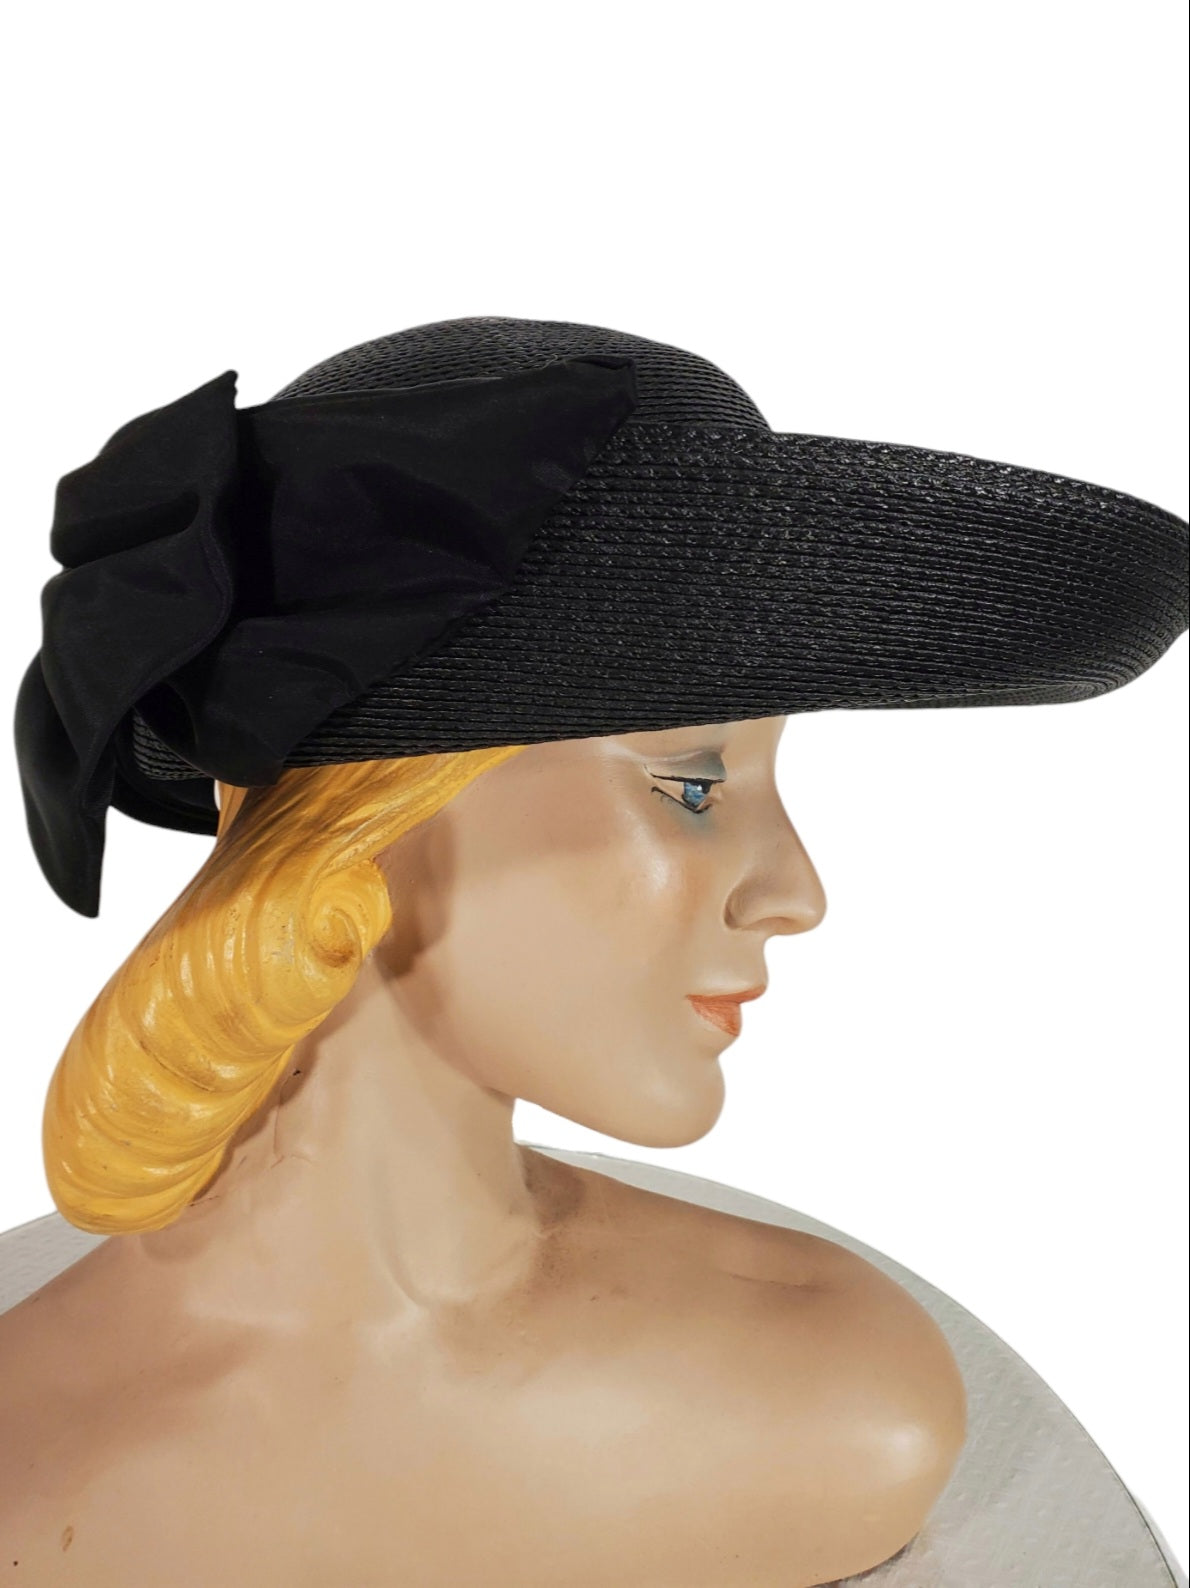 Vintage Wide Brim Hat Black & White Straw with Bows, 1960s, 14 inches, 21  inch head